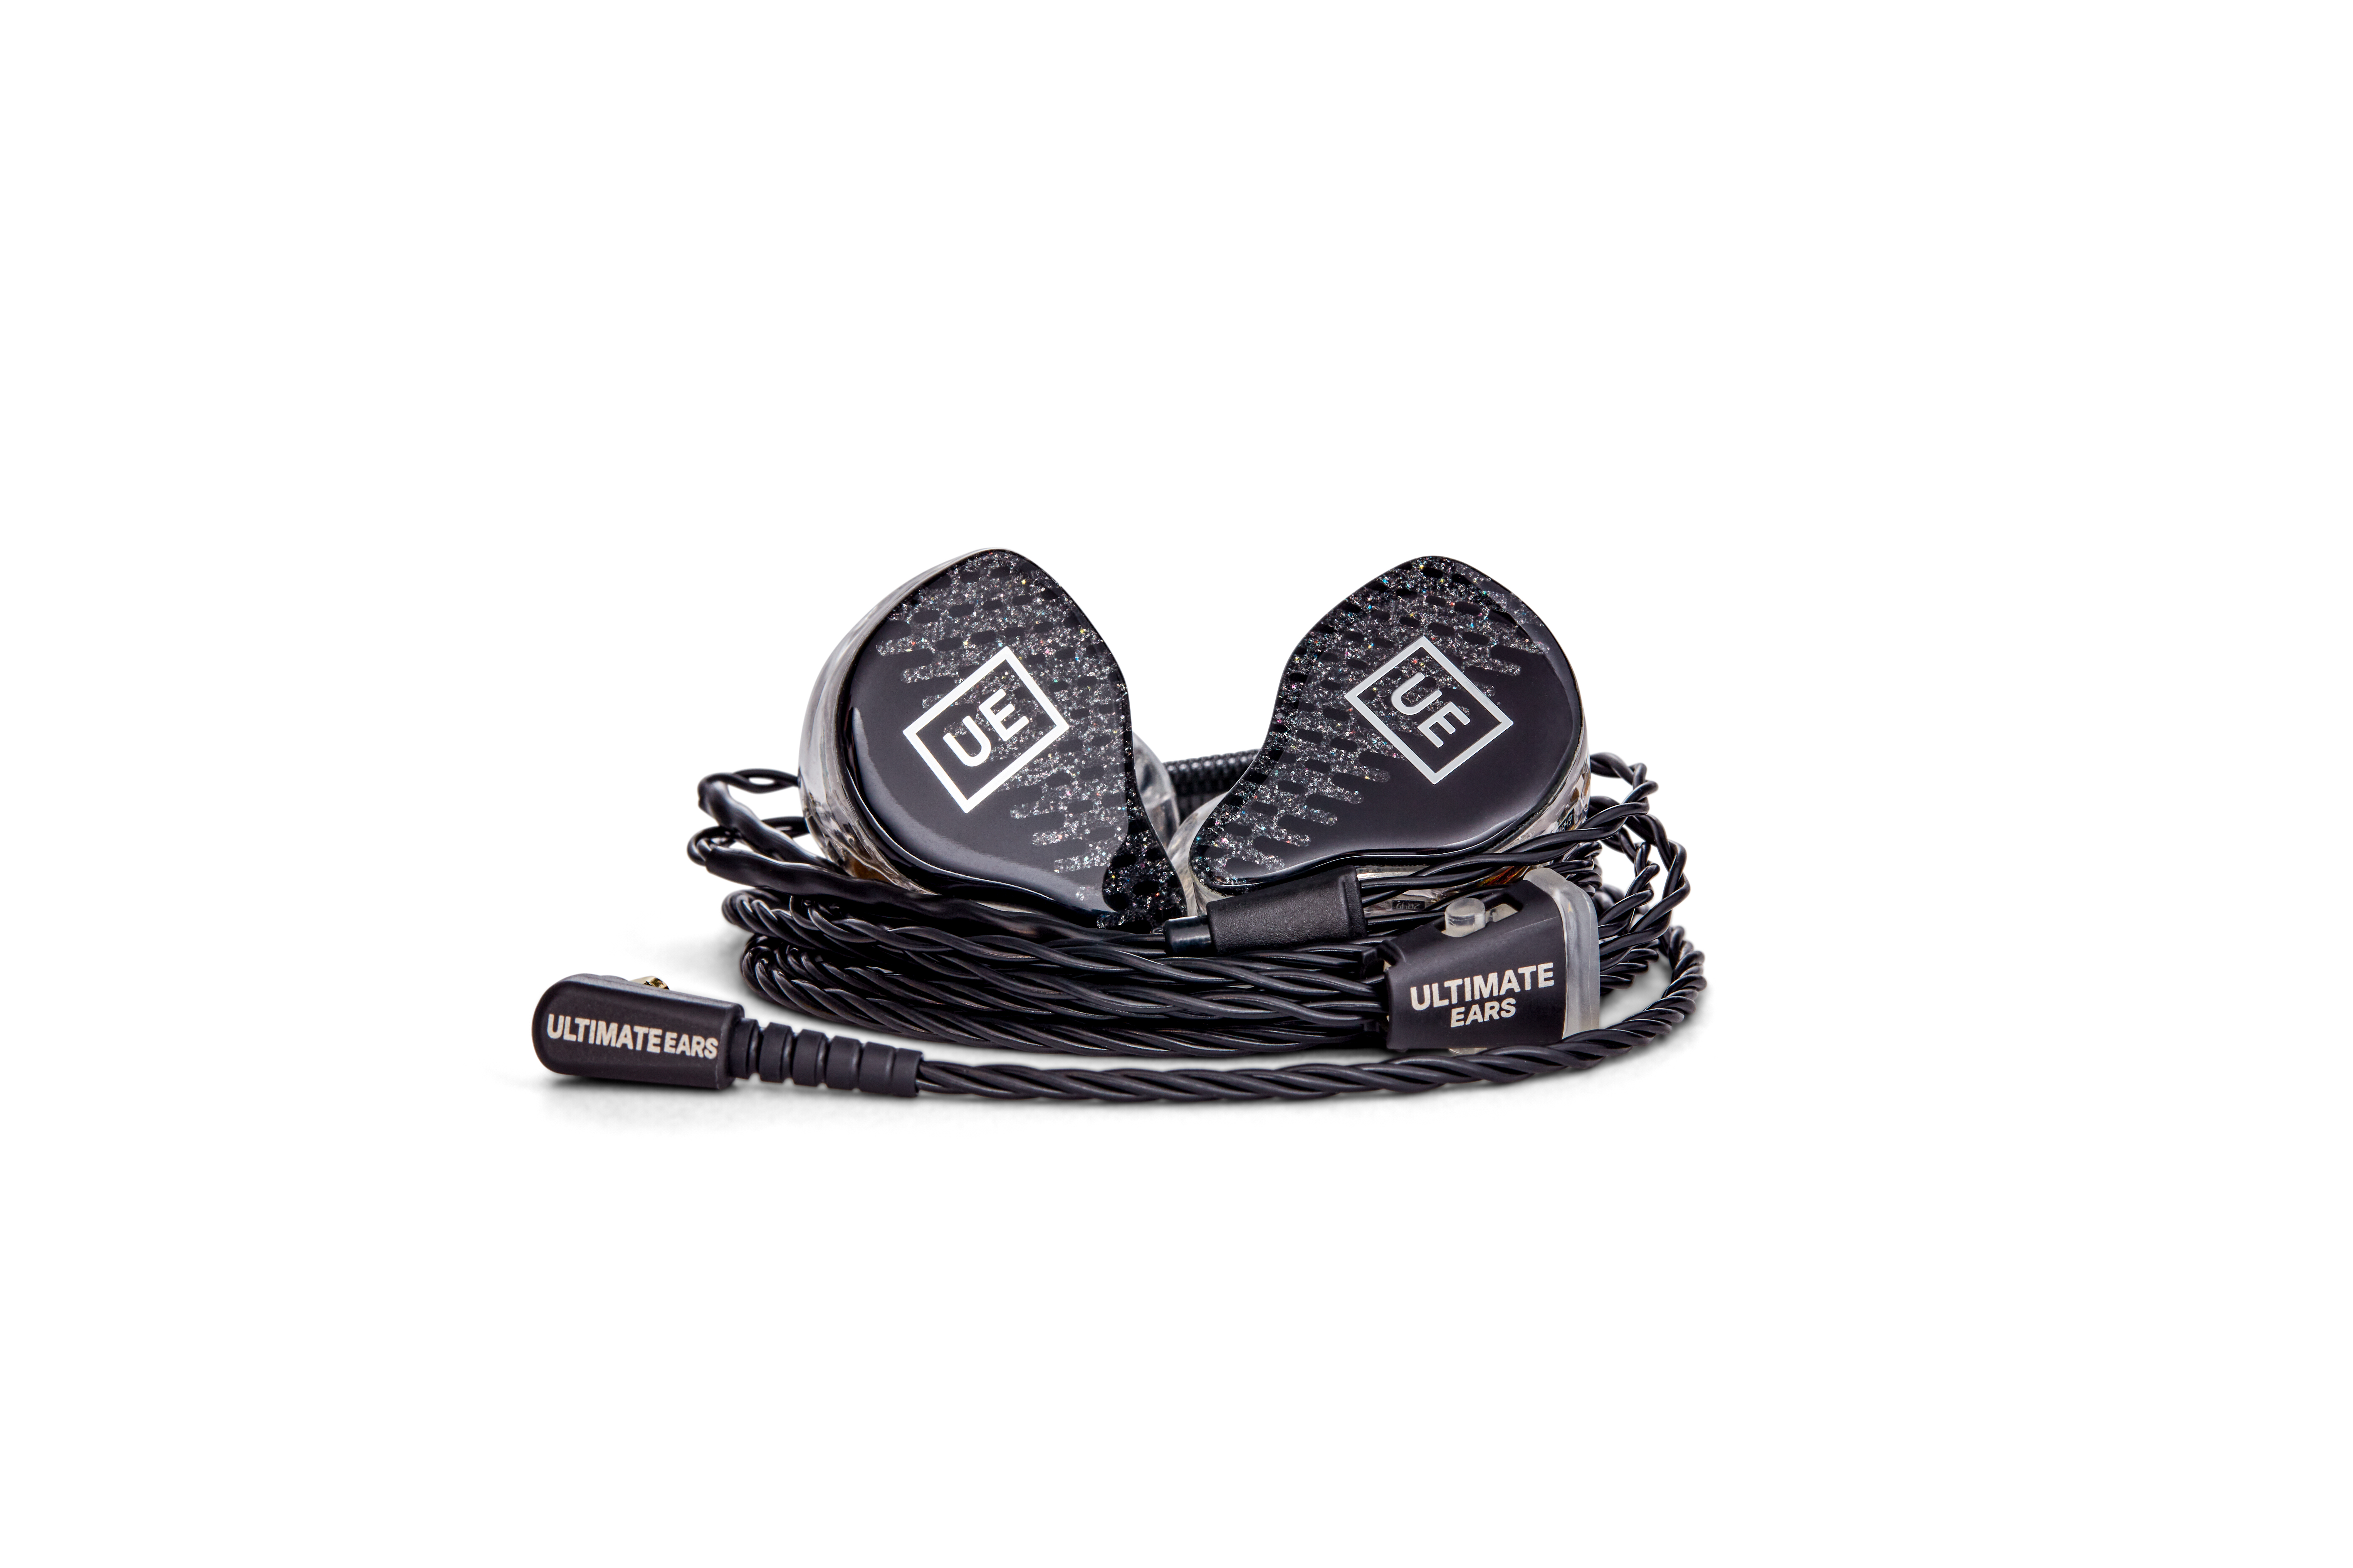 Ultimate Ears Pro & Knowles Surpass Expectations With 21-Driver